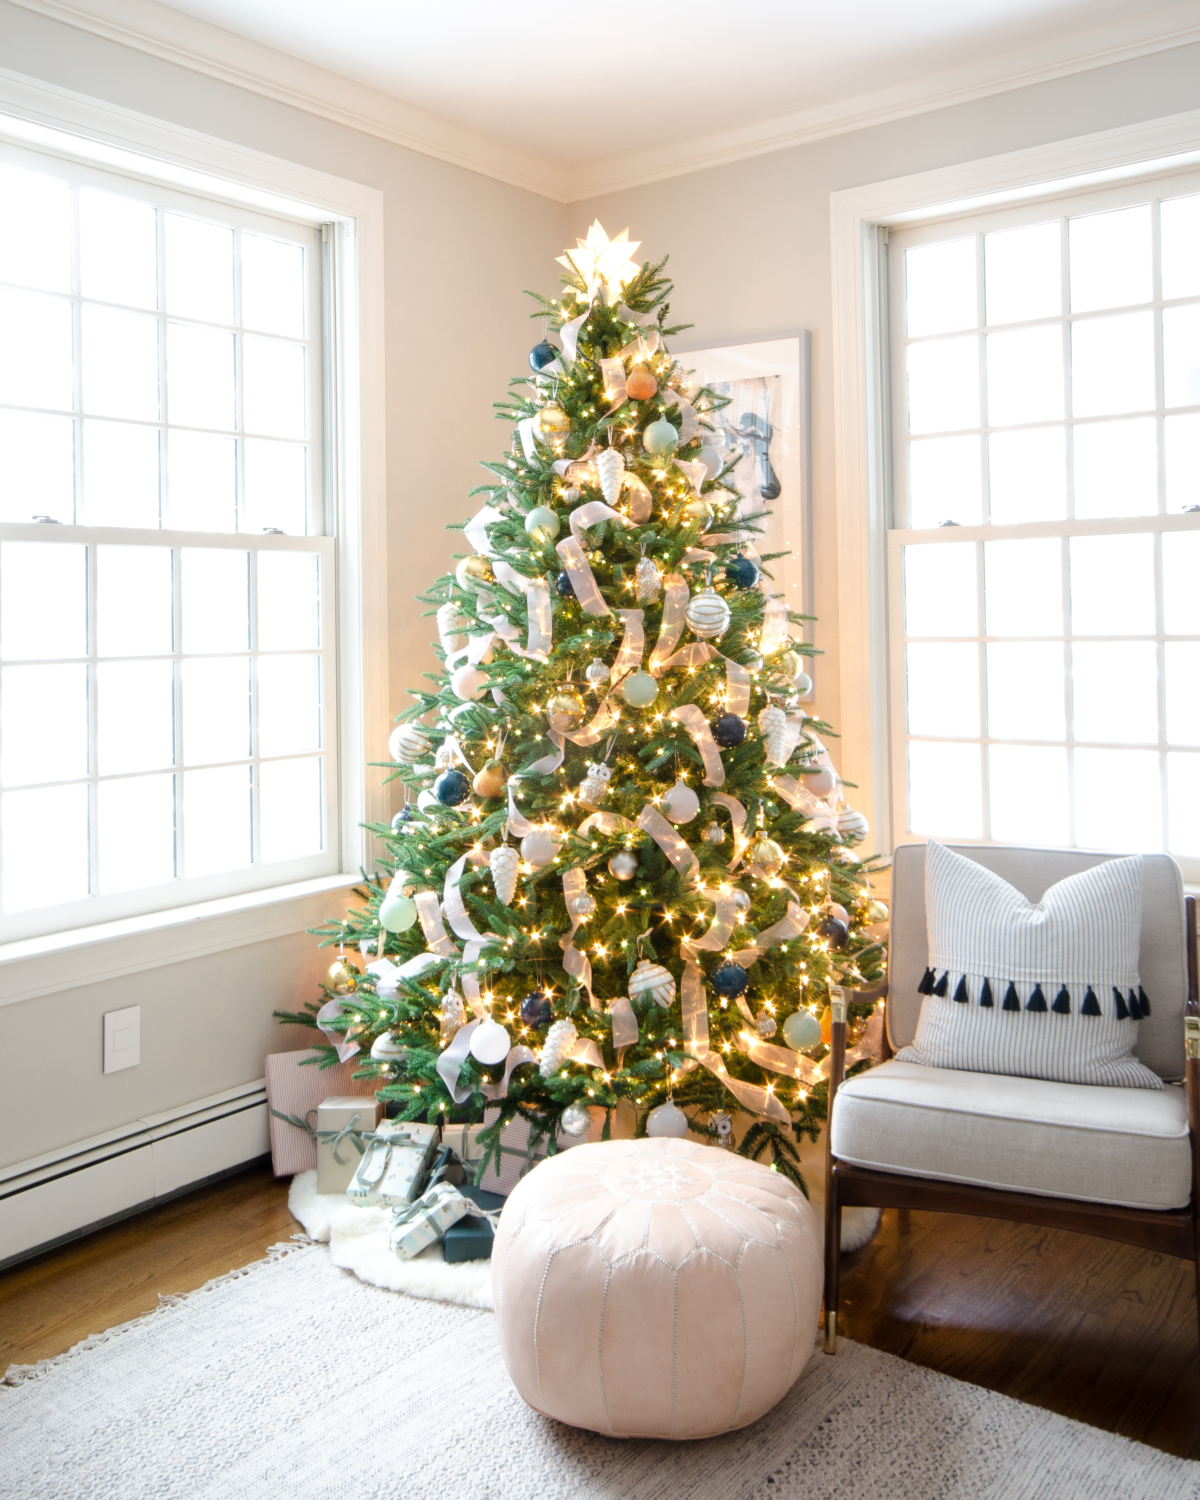 Christmas tree decorated in blush pink, deep teal, white, gold, and navy blue.